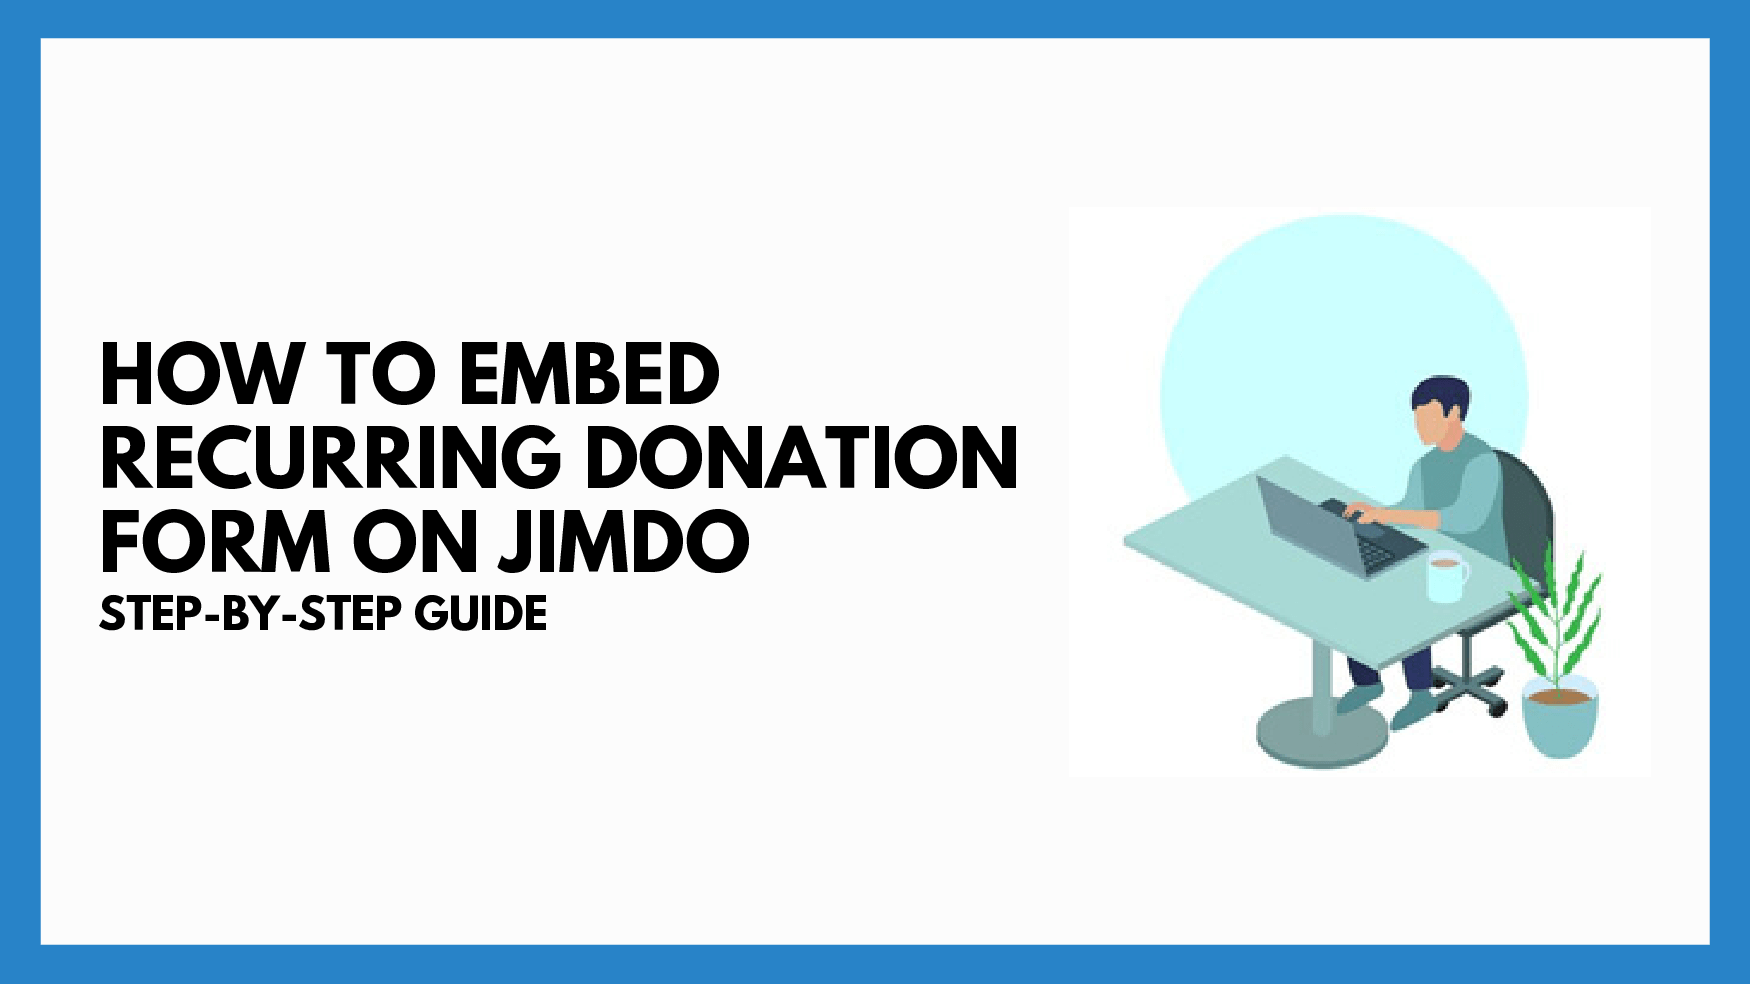 How To Embed Recurring Donation Form on Jimdo: Step-By-Step Guide